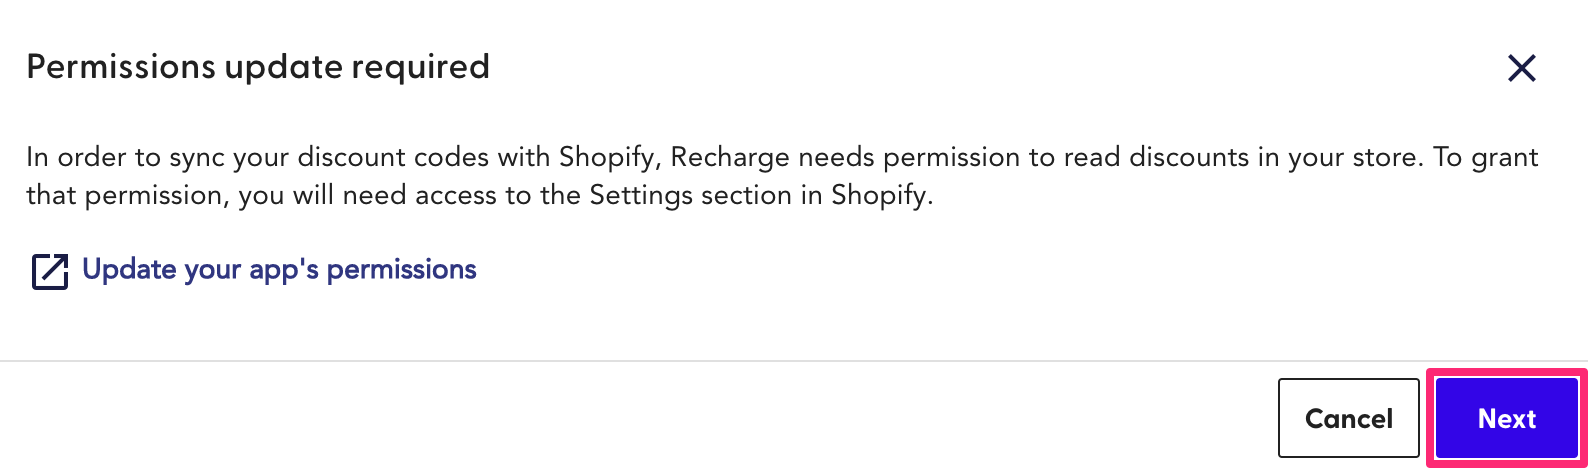 permissions_update_required_in_Recharge_click_next.png